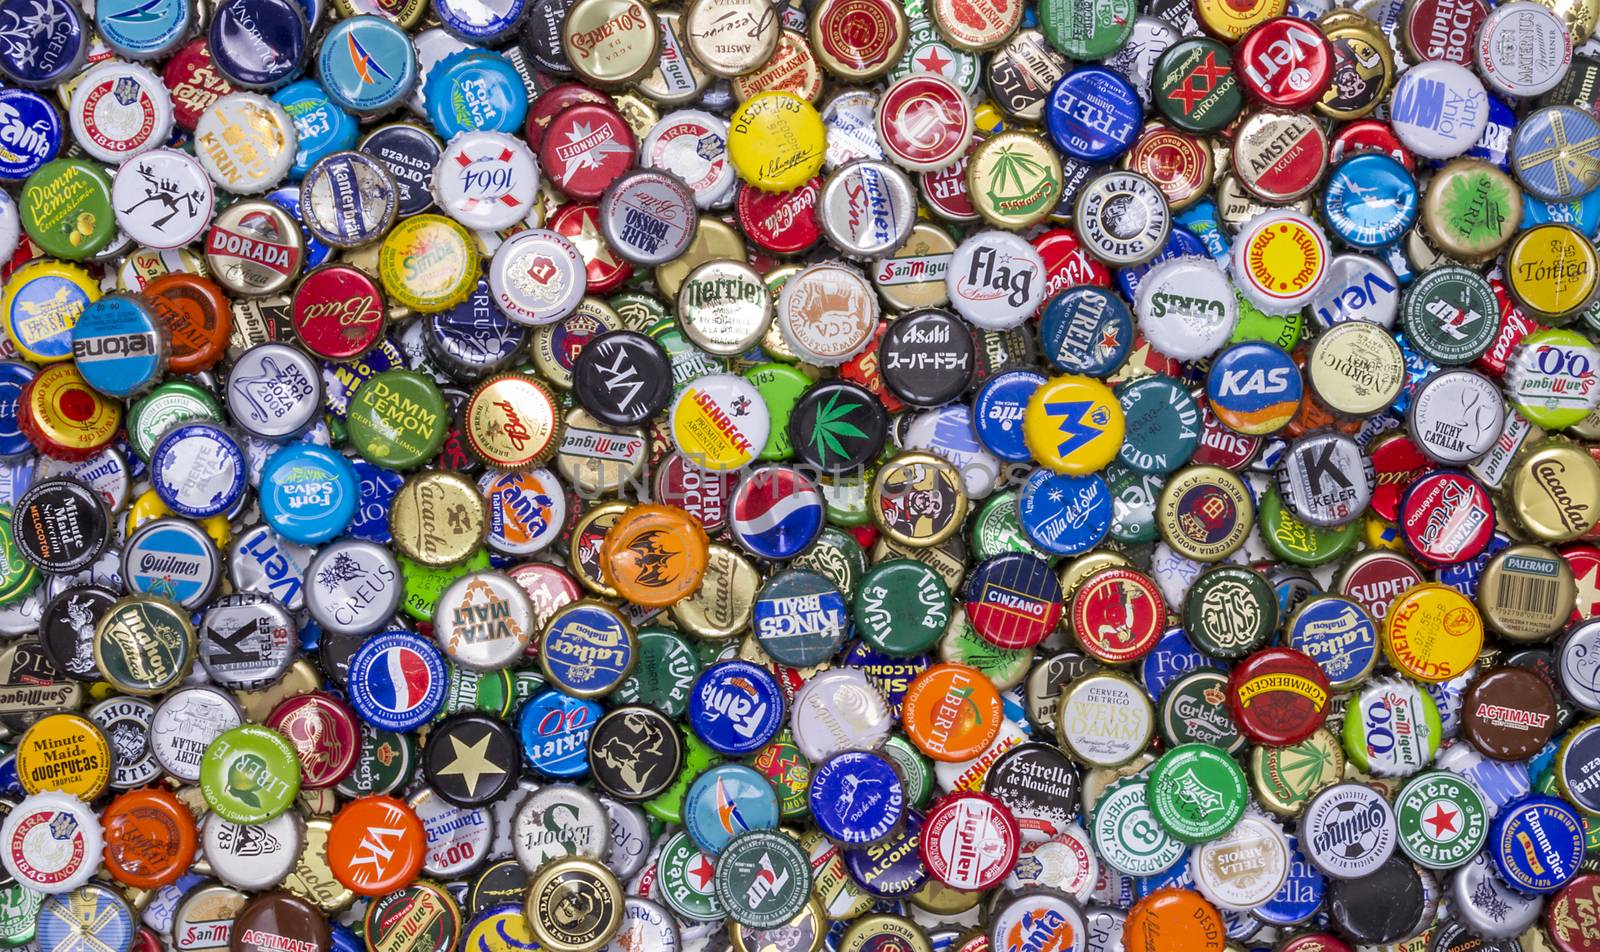 Aerial view of an unordered collection of crowncaps of different brands and types of drink.